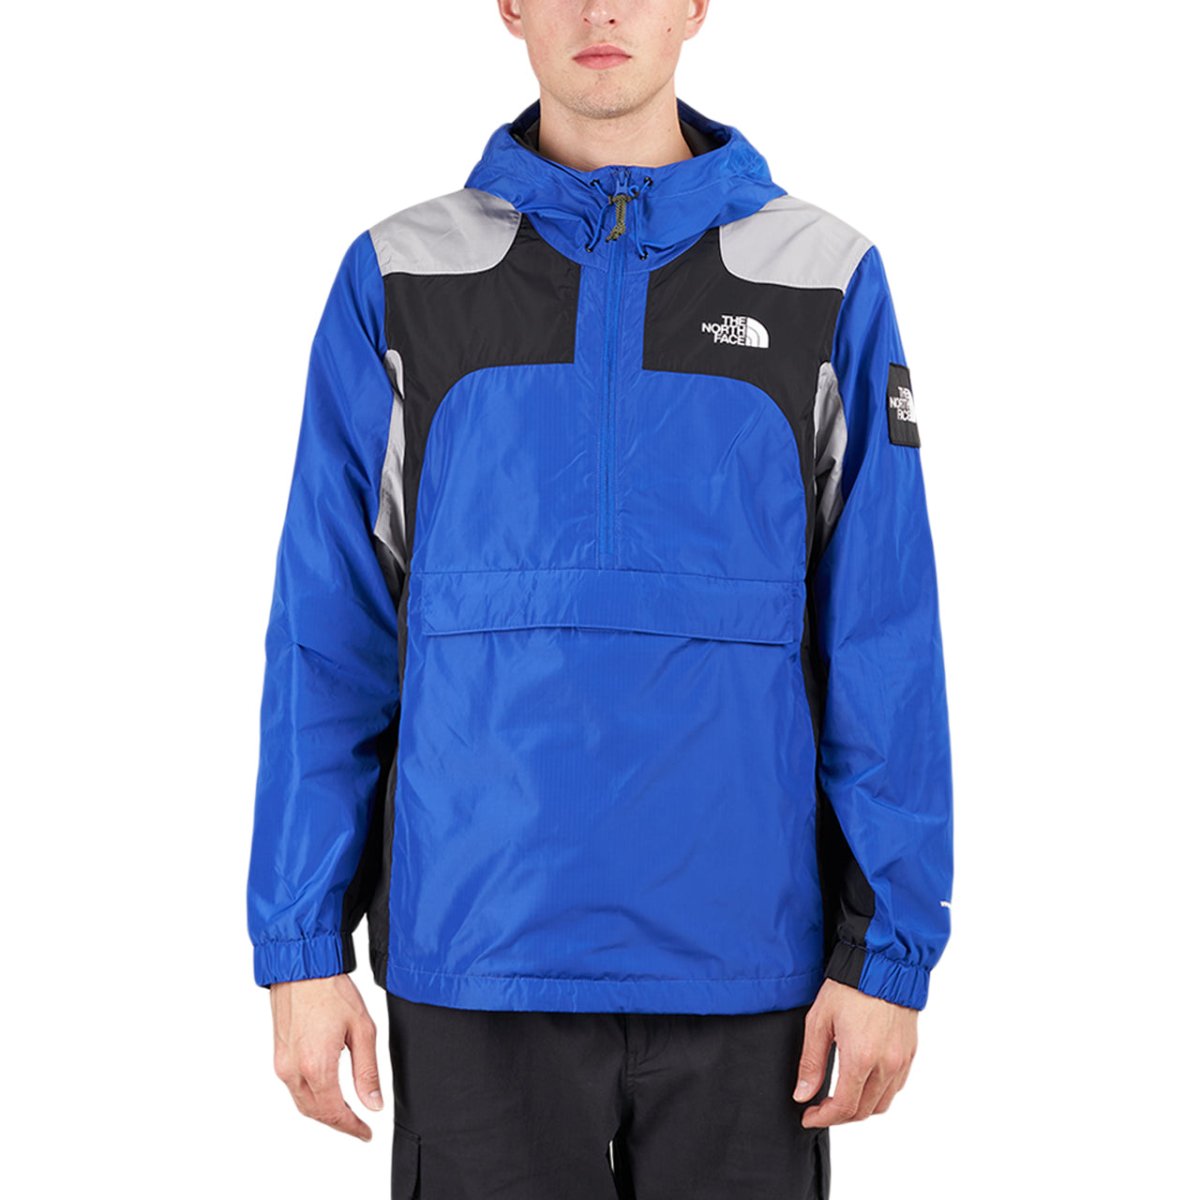 Image of The North Face BB Search & Rescue Wind Jacket (Blue / Black / Grey)